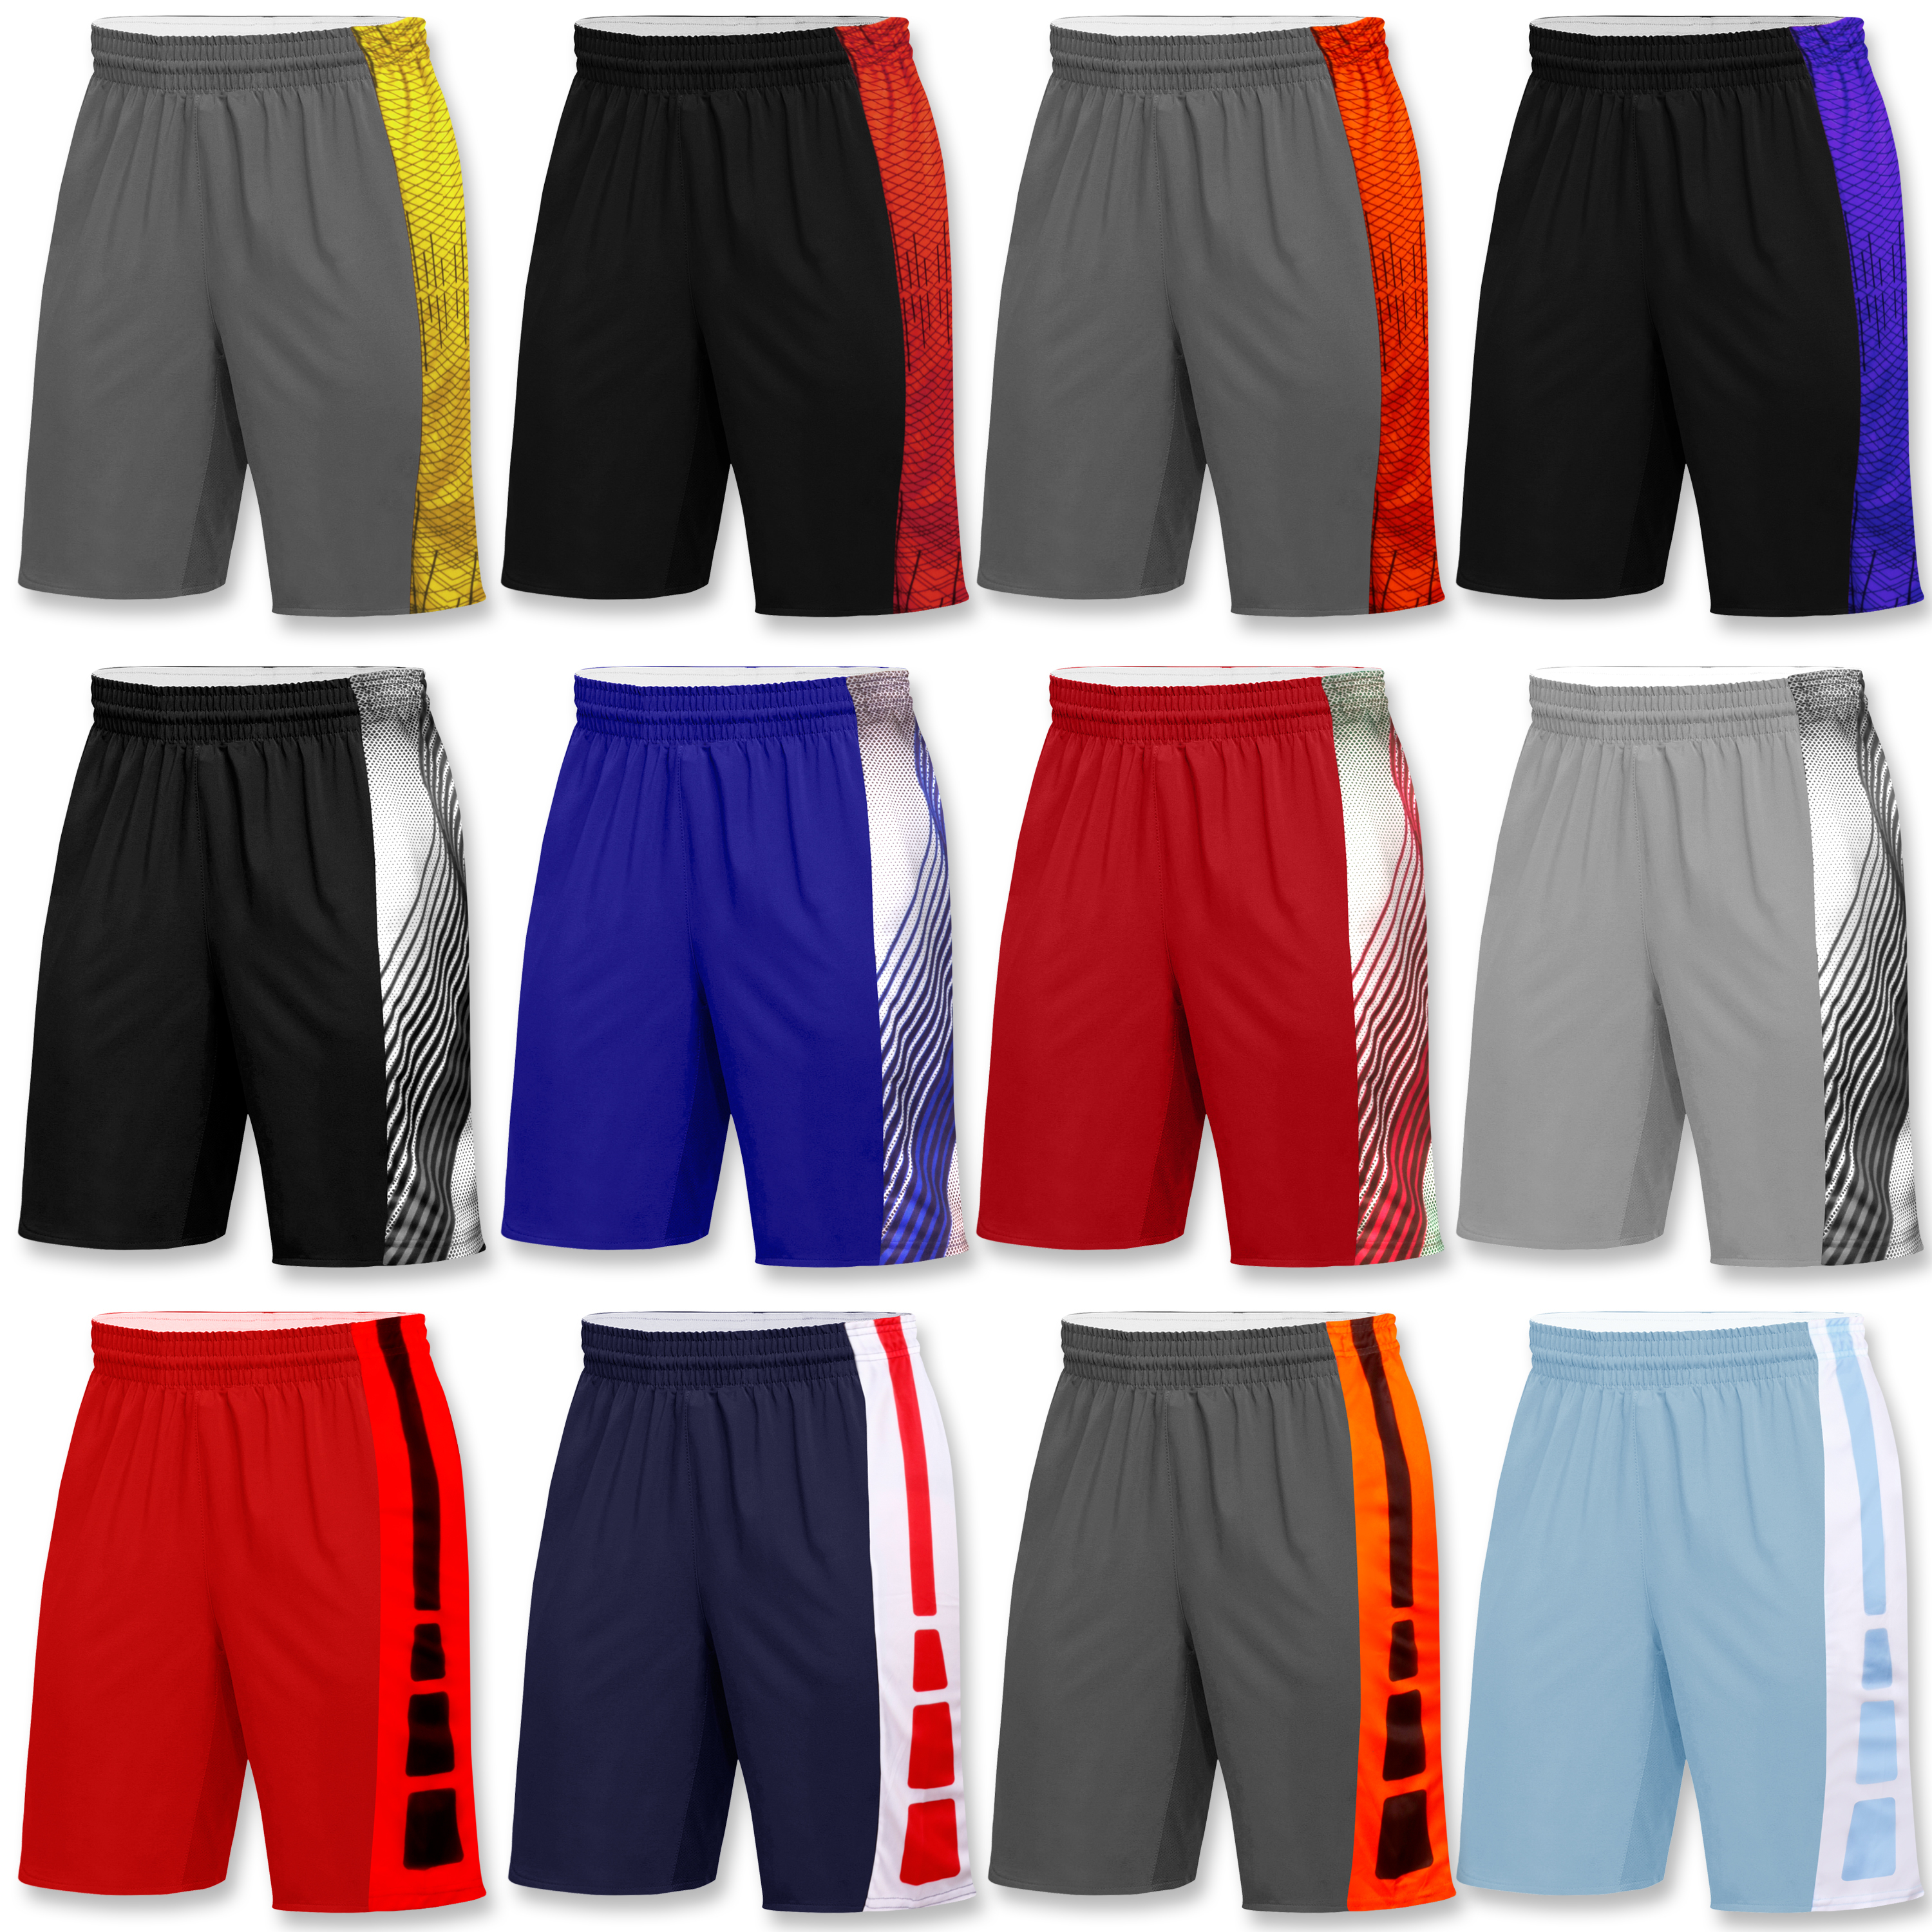 5-Pack Mystery Deal: Men's Active Athletic Performance Shorts - Small